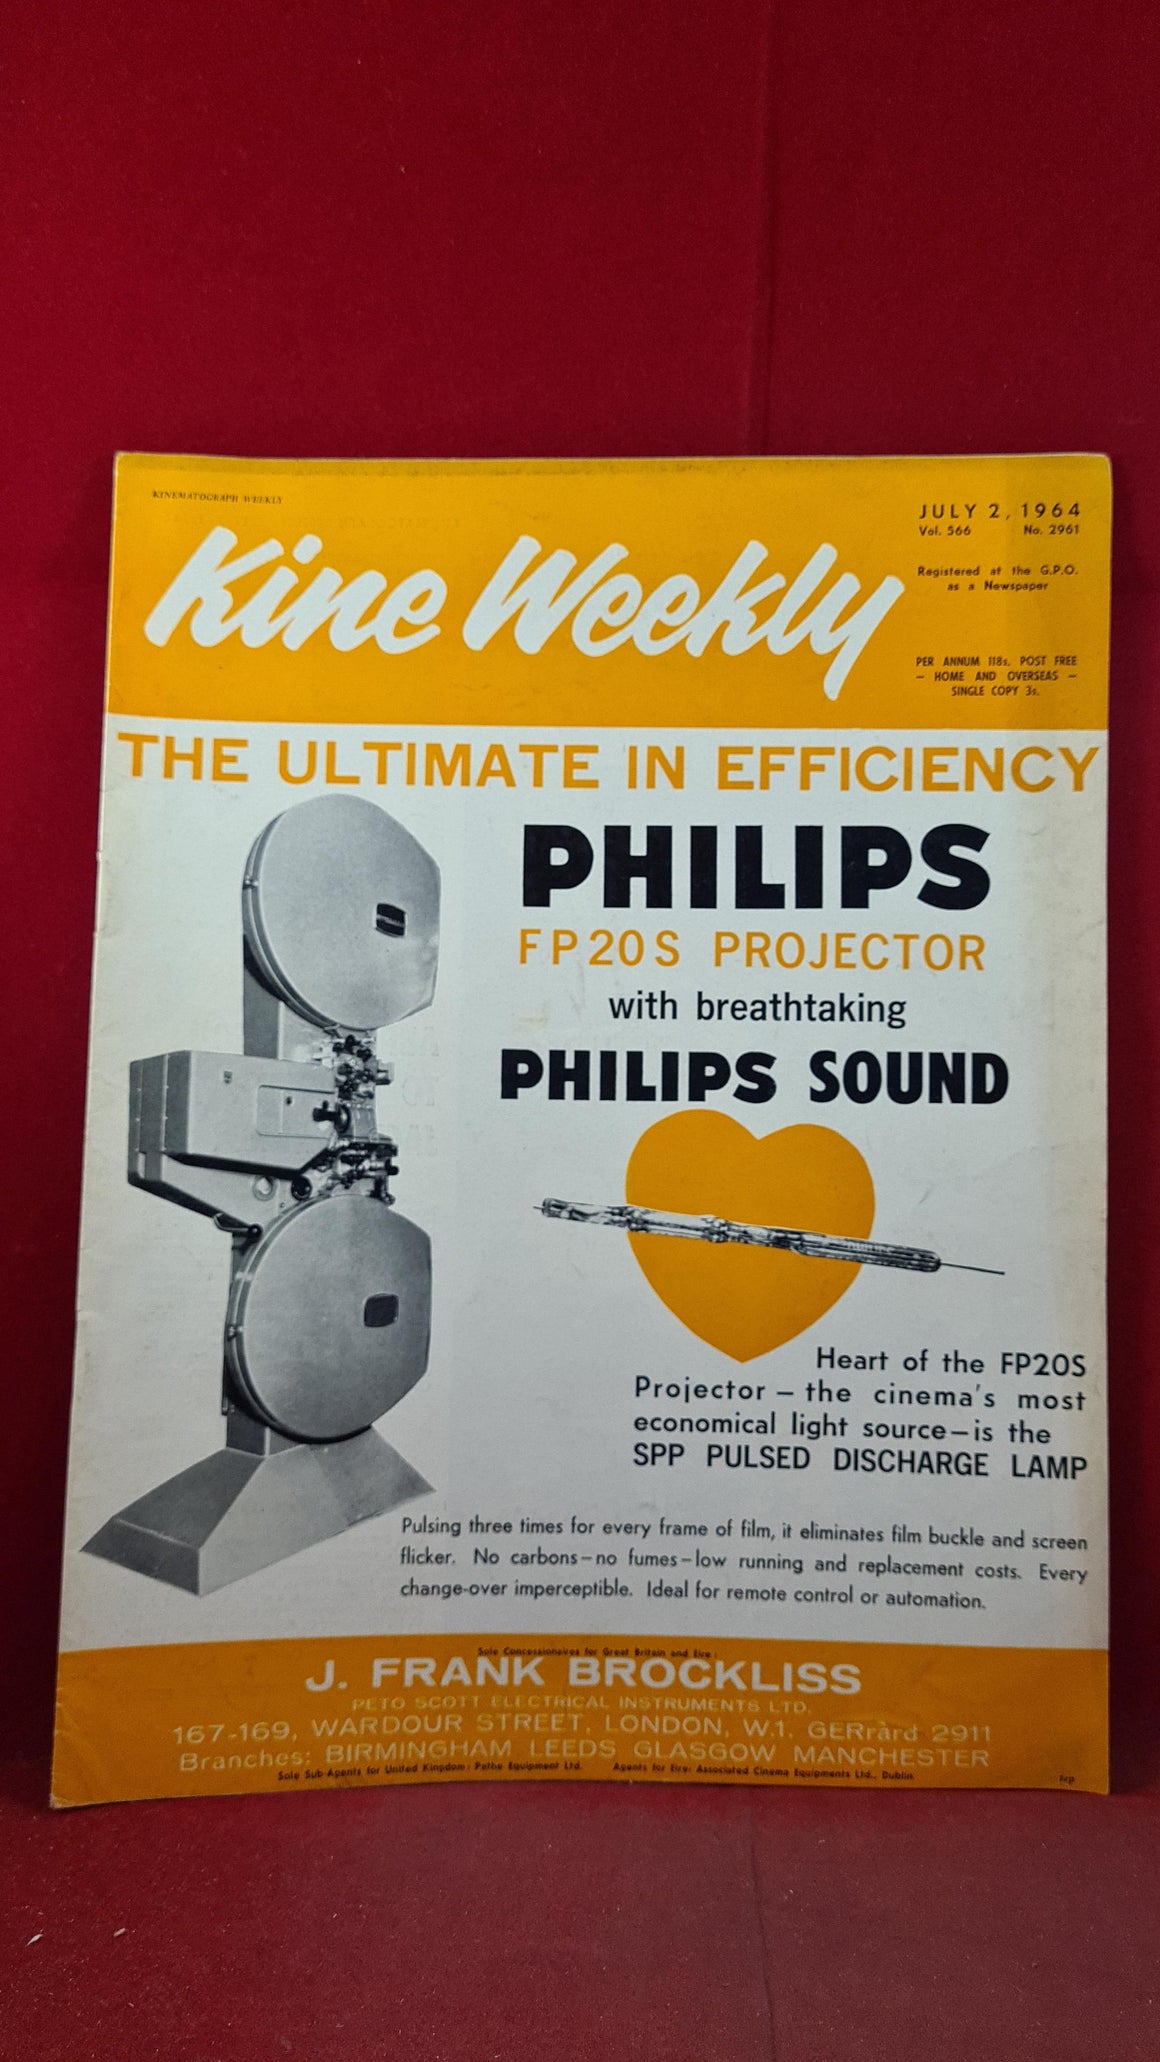 kine-weekly-volume-566-number-2961-july-2-1964-richard-dalby-s-library